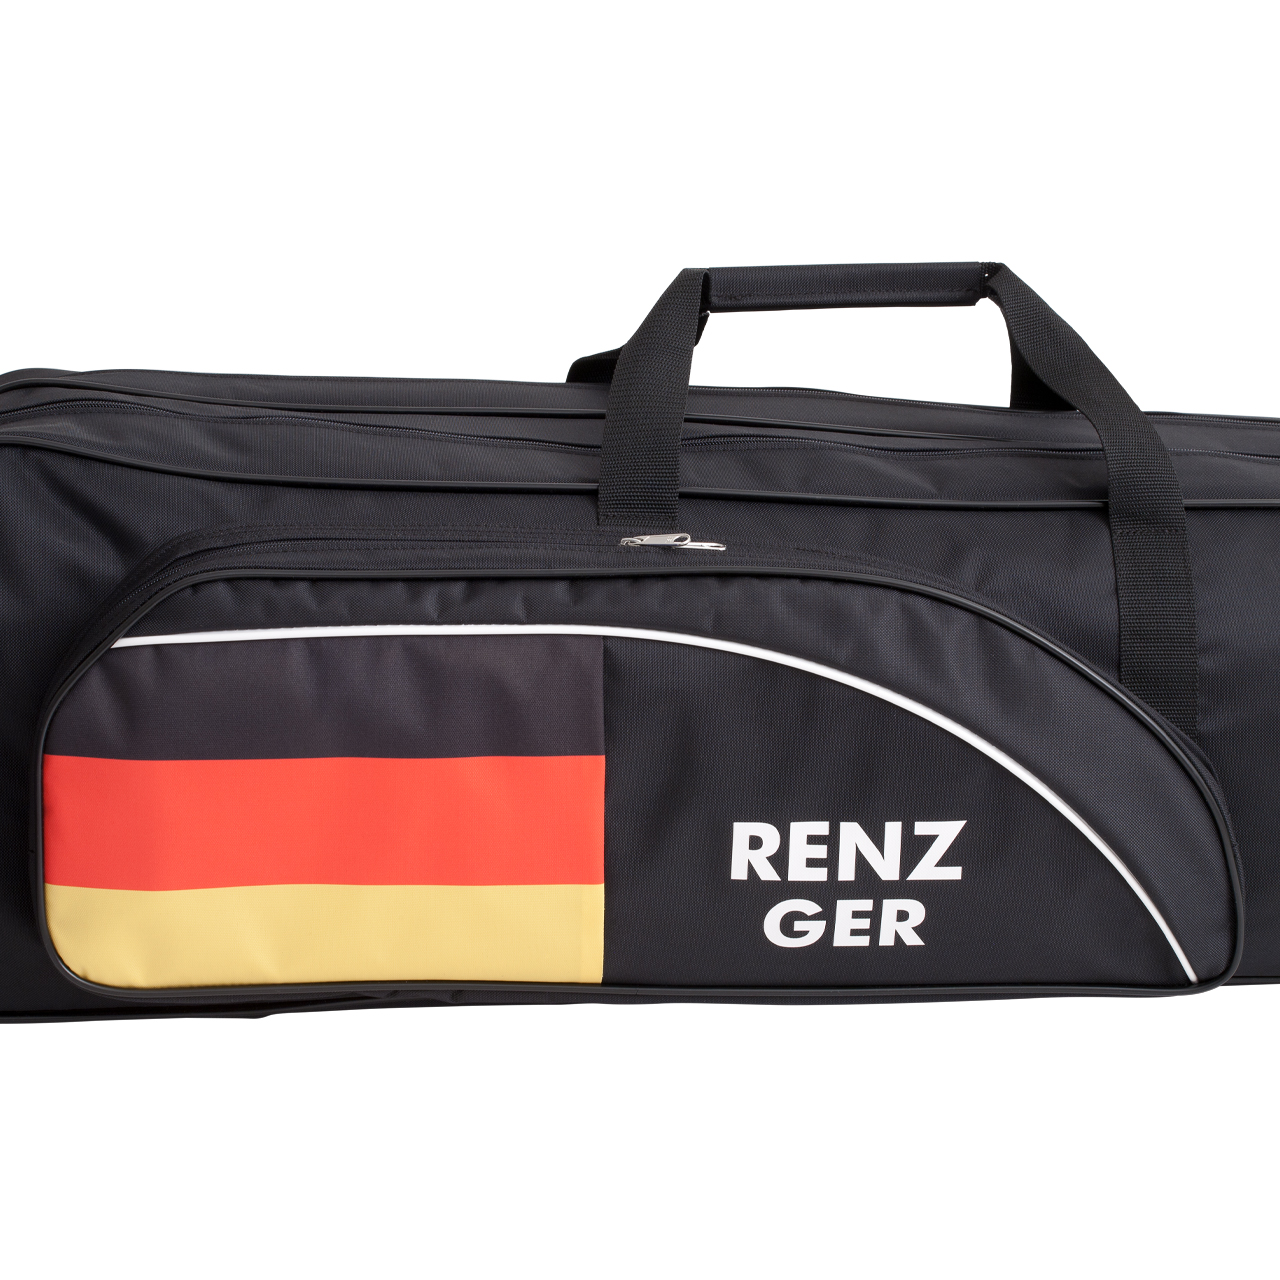 rollbag "Vario", 2 main partitions, 2 outside pockets